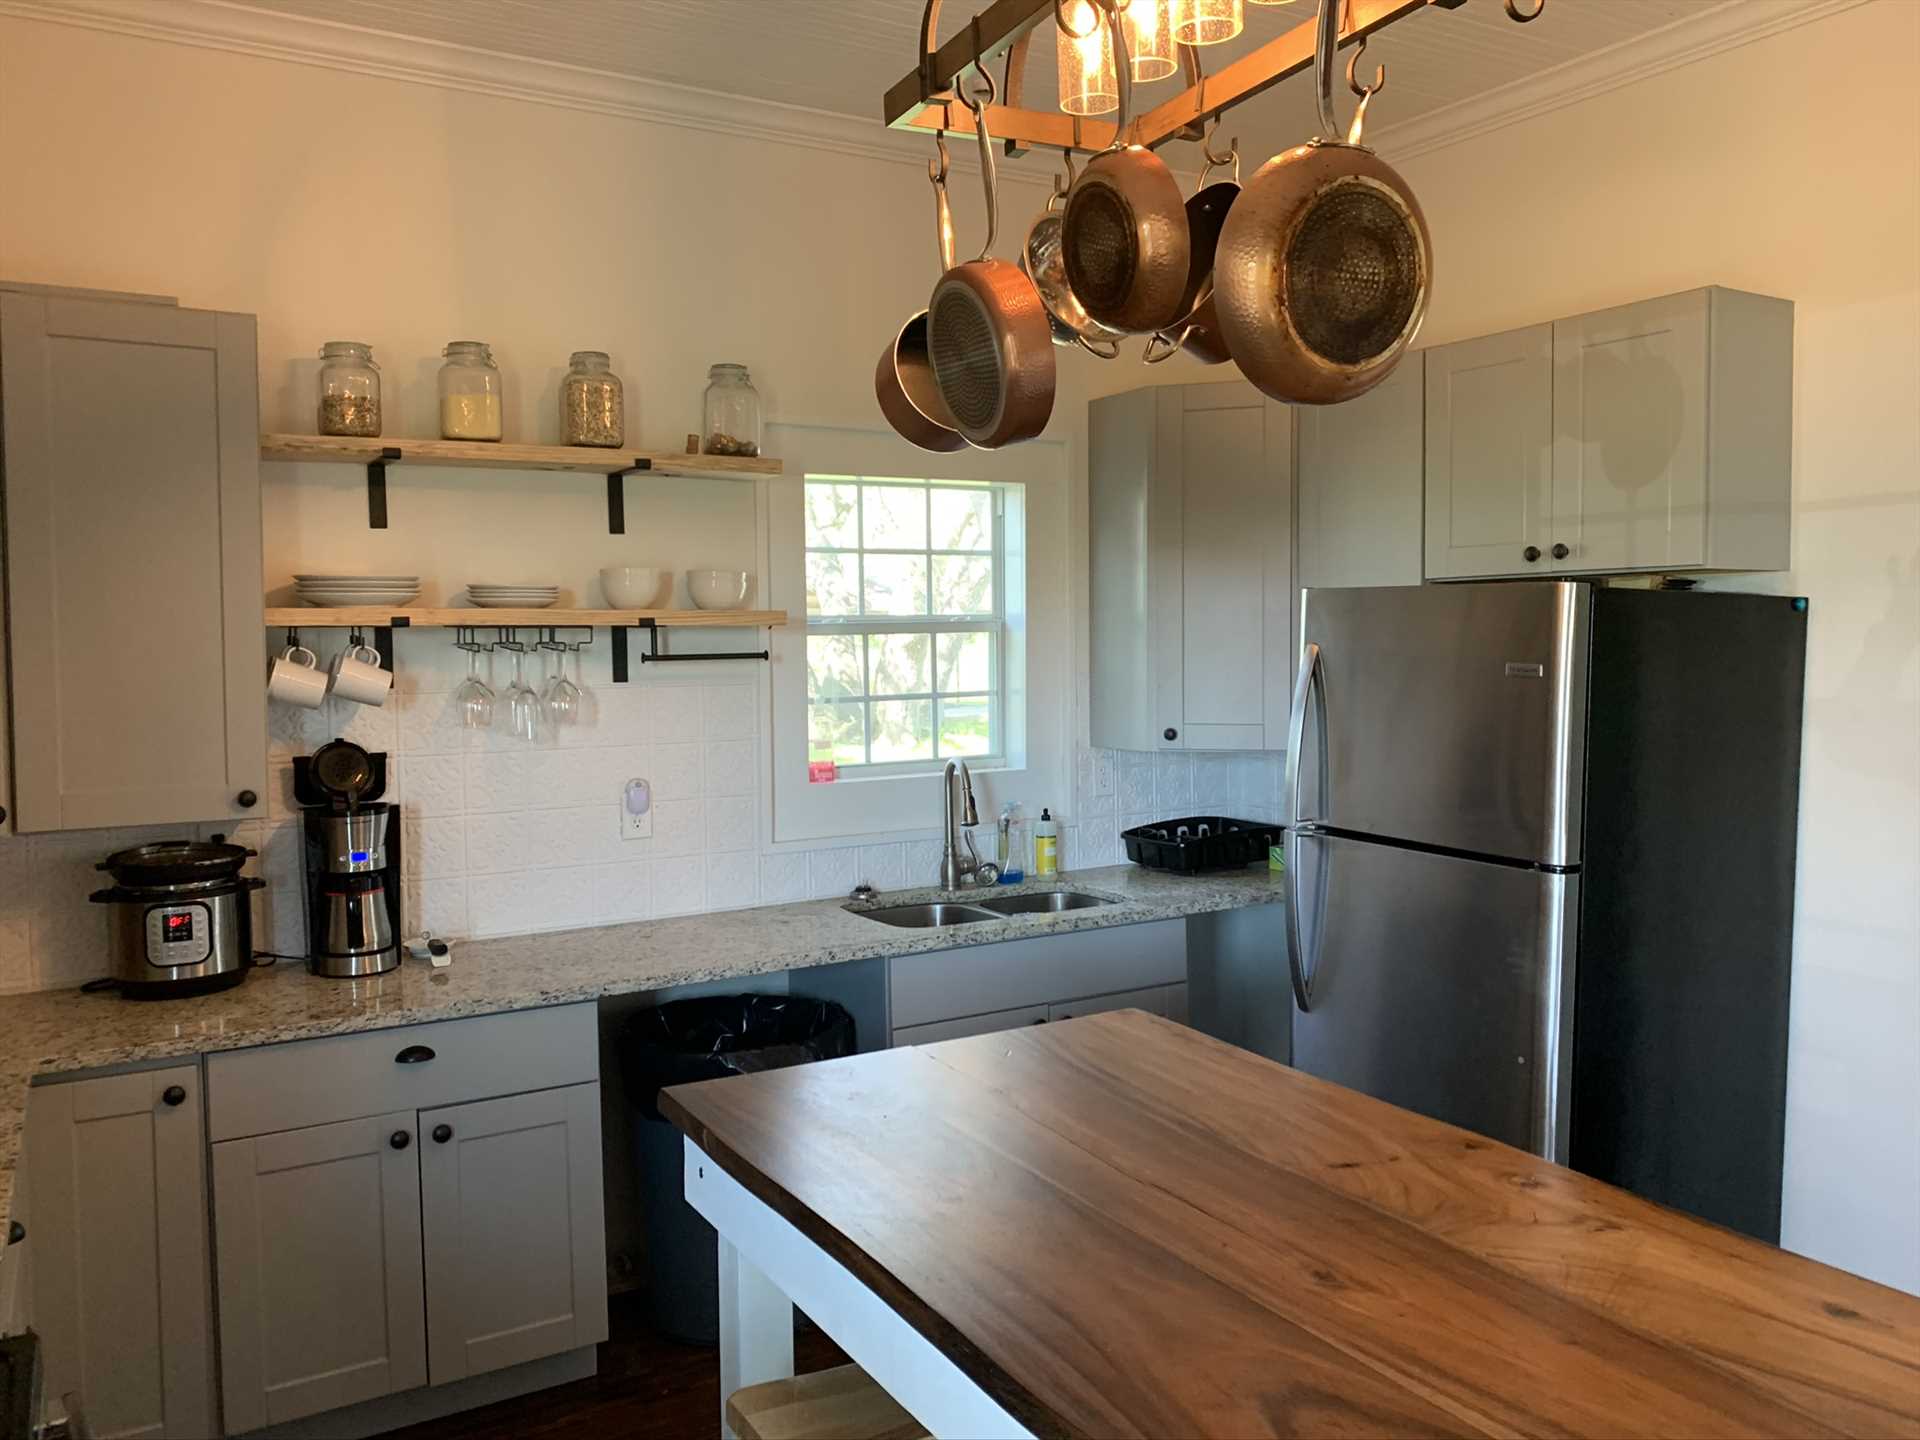                                                 The cooks in your crew will love the appliances, cookware, and serving ware provided in the comfy country kitchen.